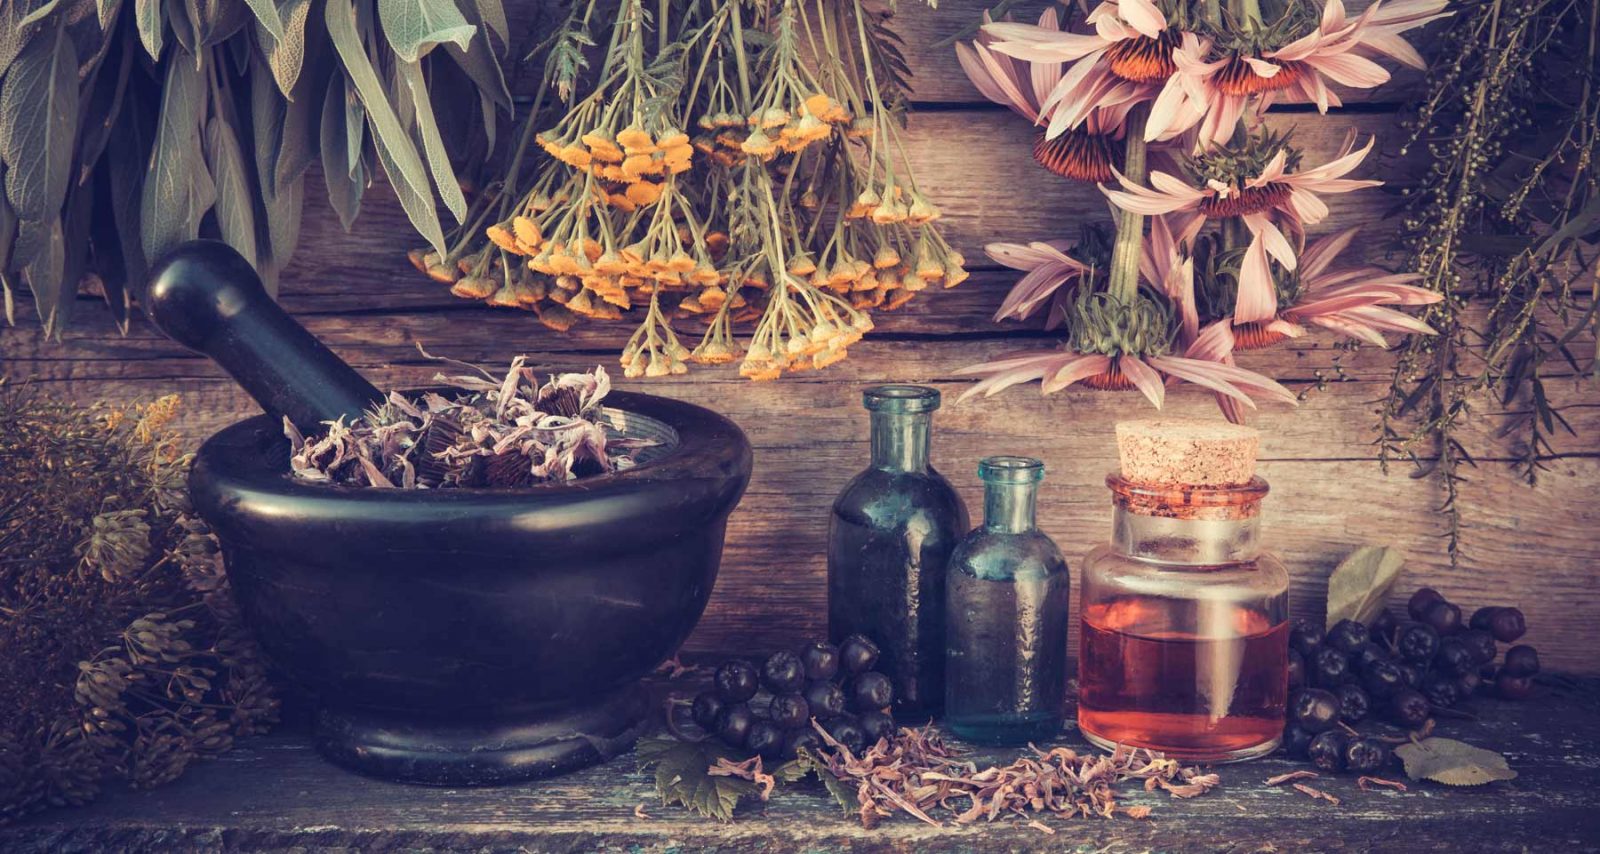 Hand-crafted OrAromatherapy & Body Care